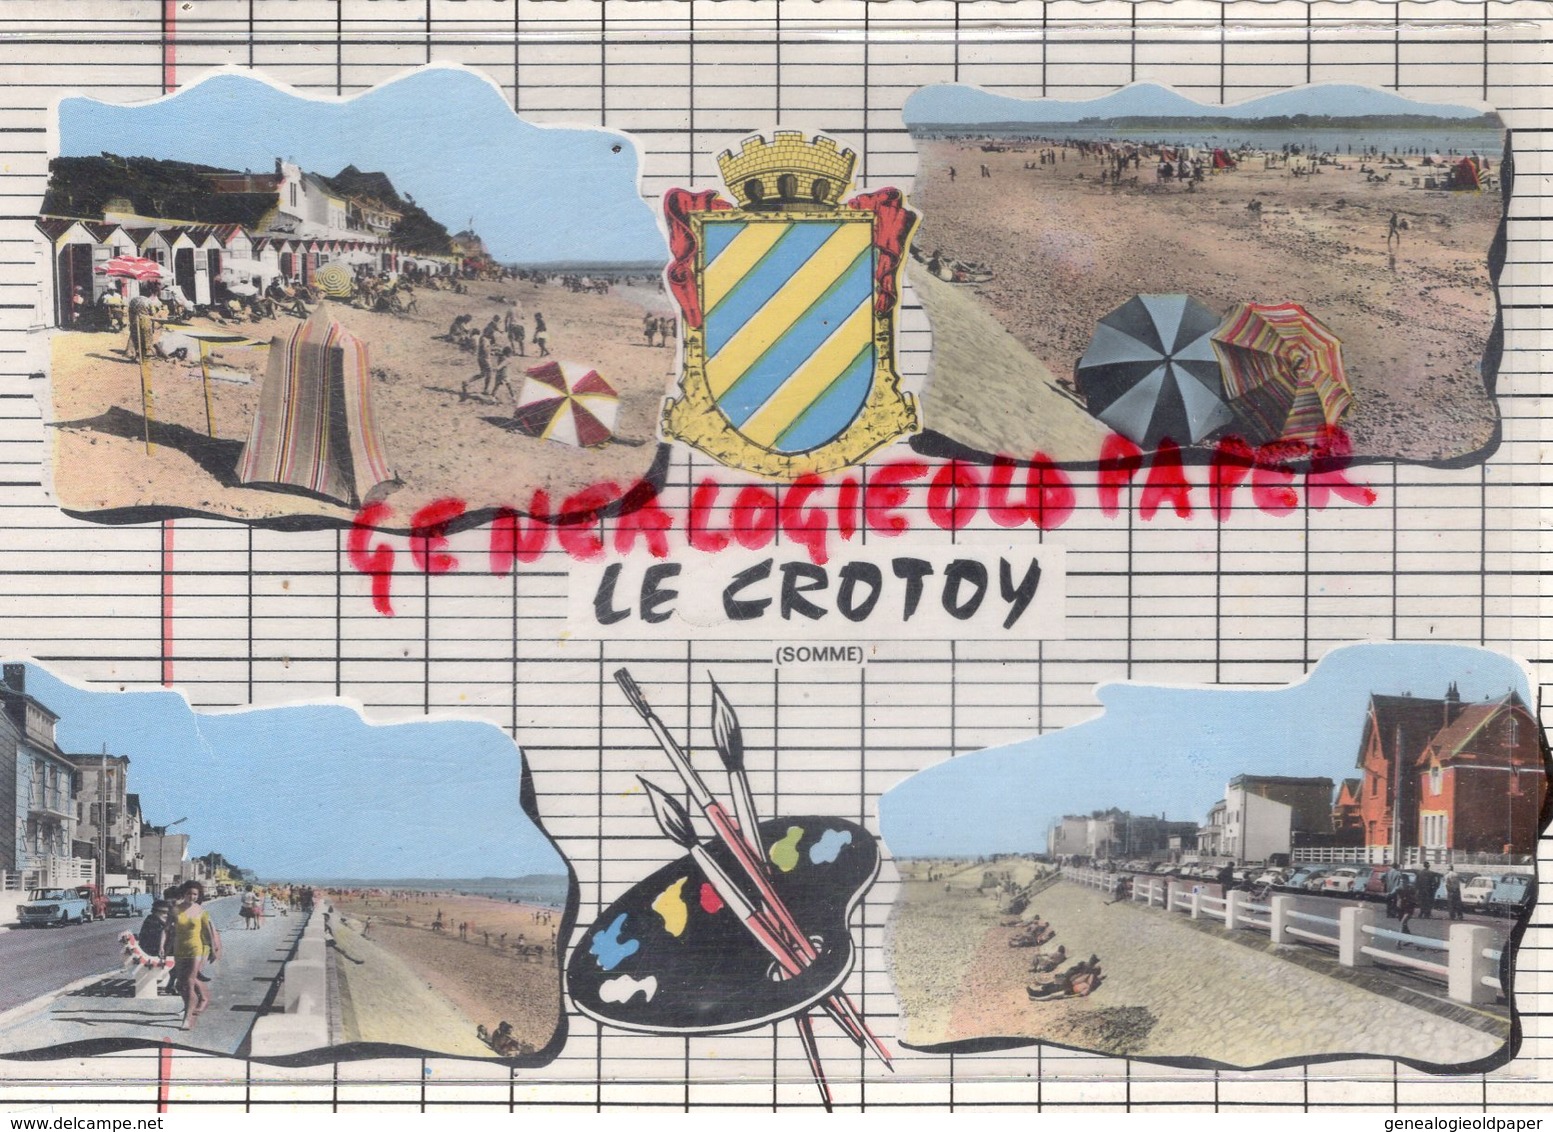 80 - LE CROTOY -     -   SOMME - Le Crotoy